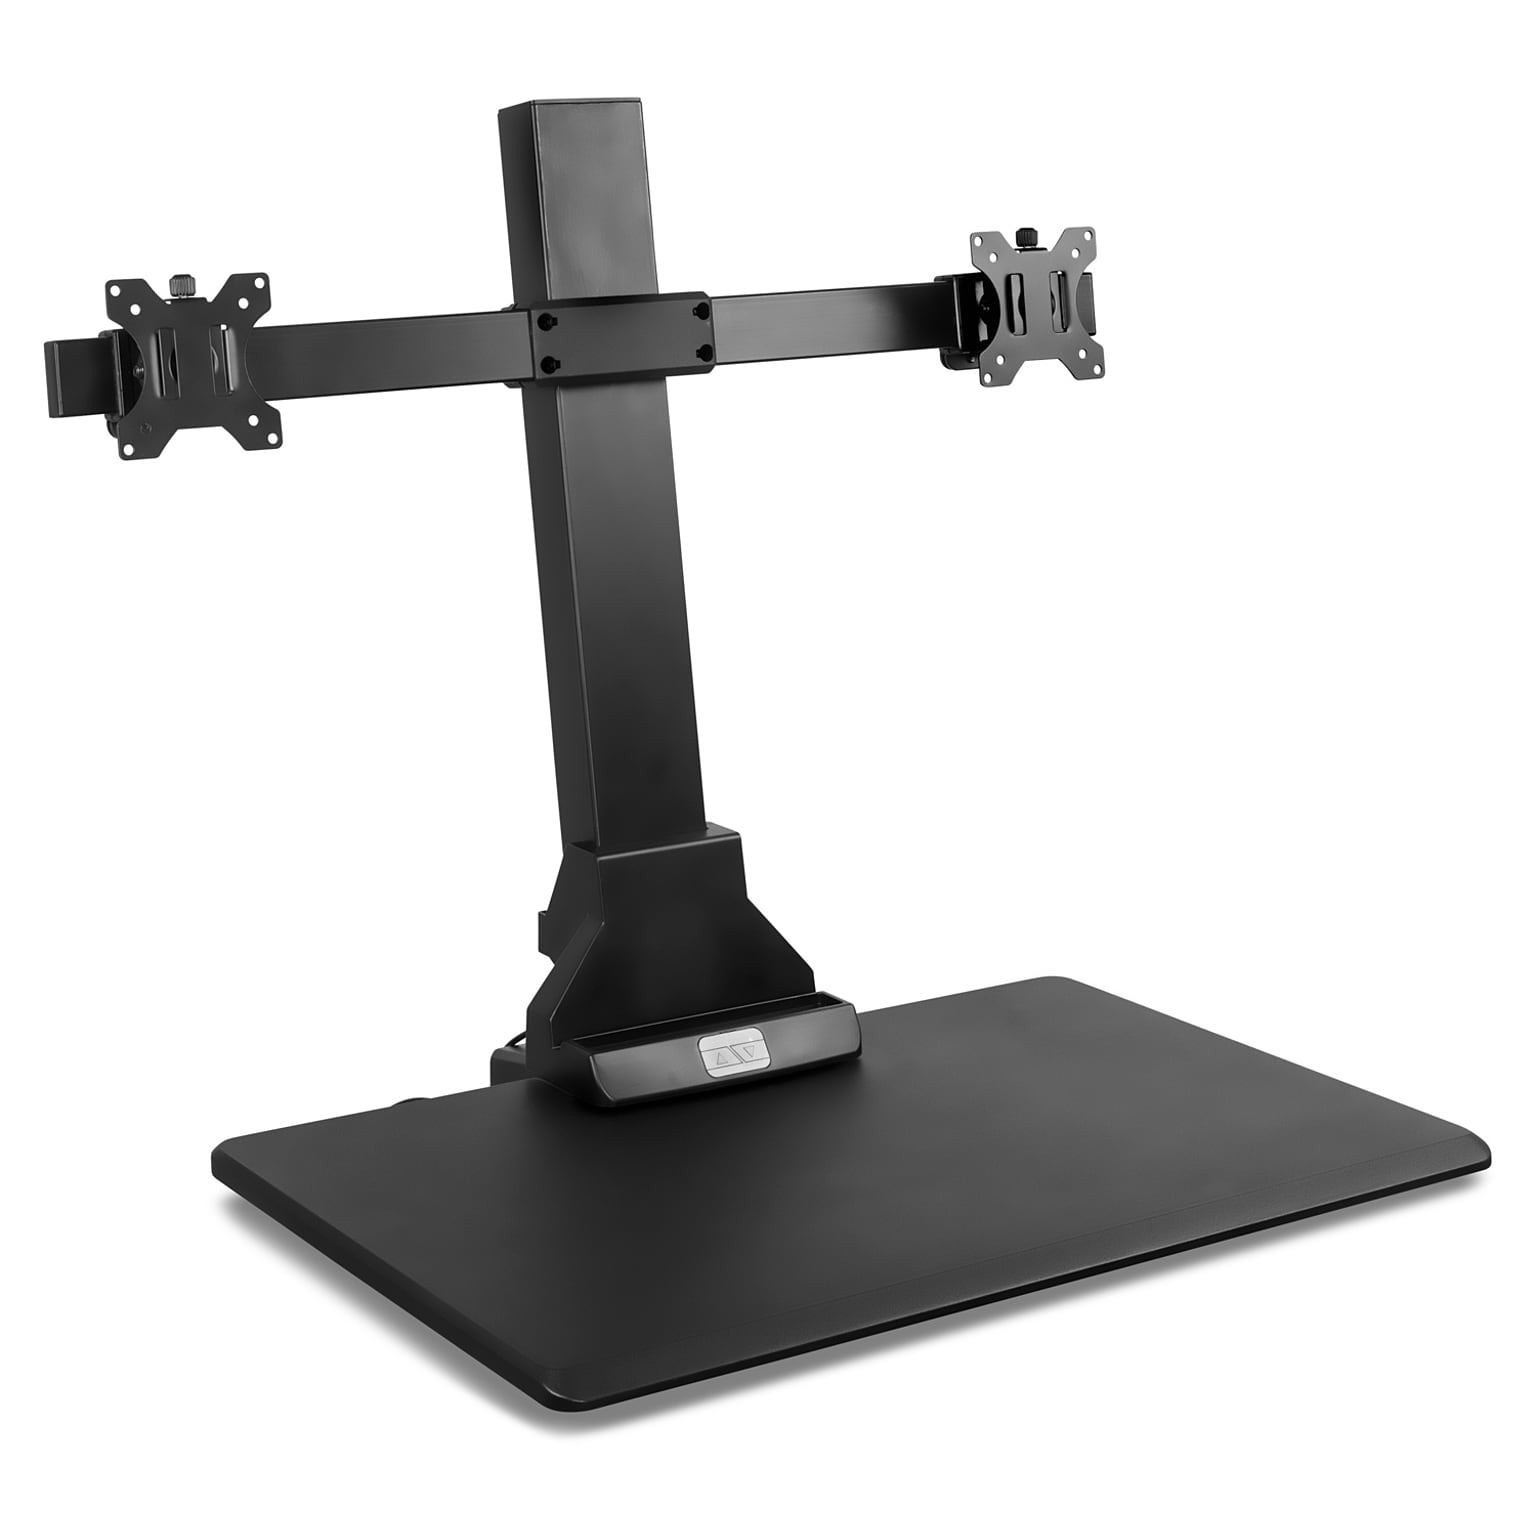 Mount-It! 28W Electric Adjustable Standing Desk Converter with Dual Monitor Mount, Black (MI-7952)